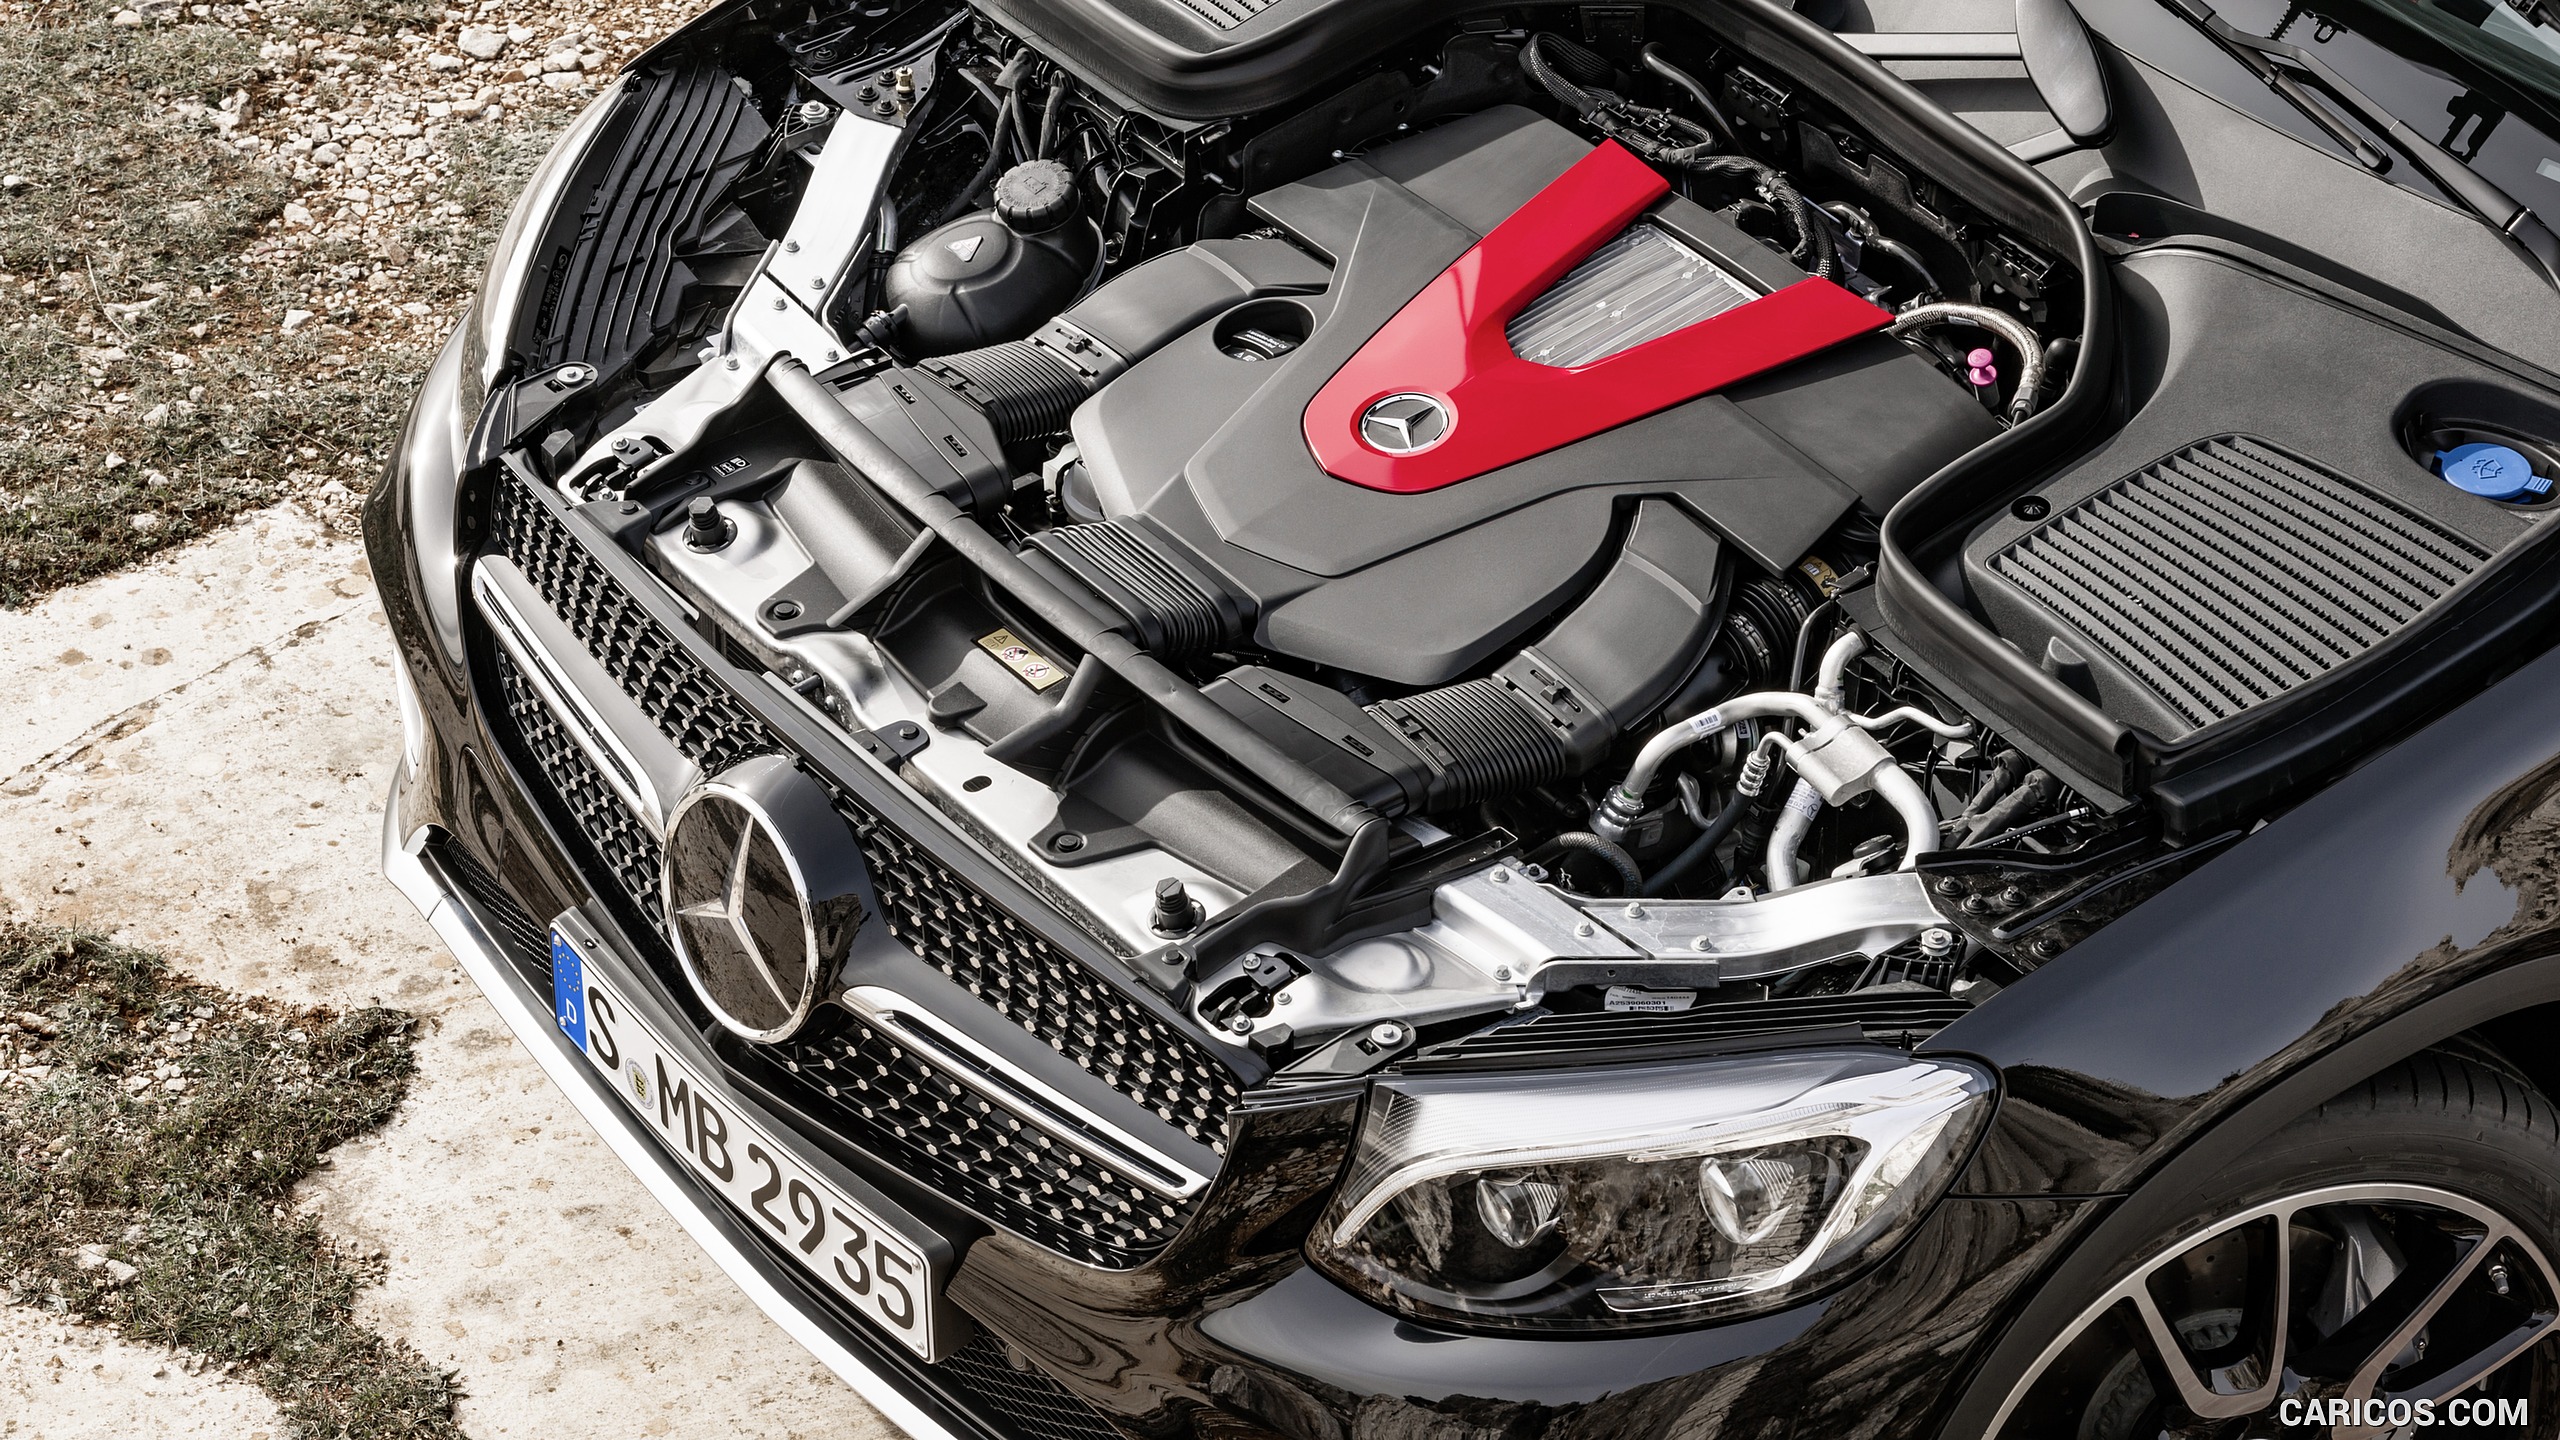 2017 Mercedes-AMG GLC 43 4MATIC (Chassis: X253, Color: Obsidian Black) - Engine, #23 of 108